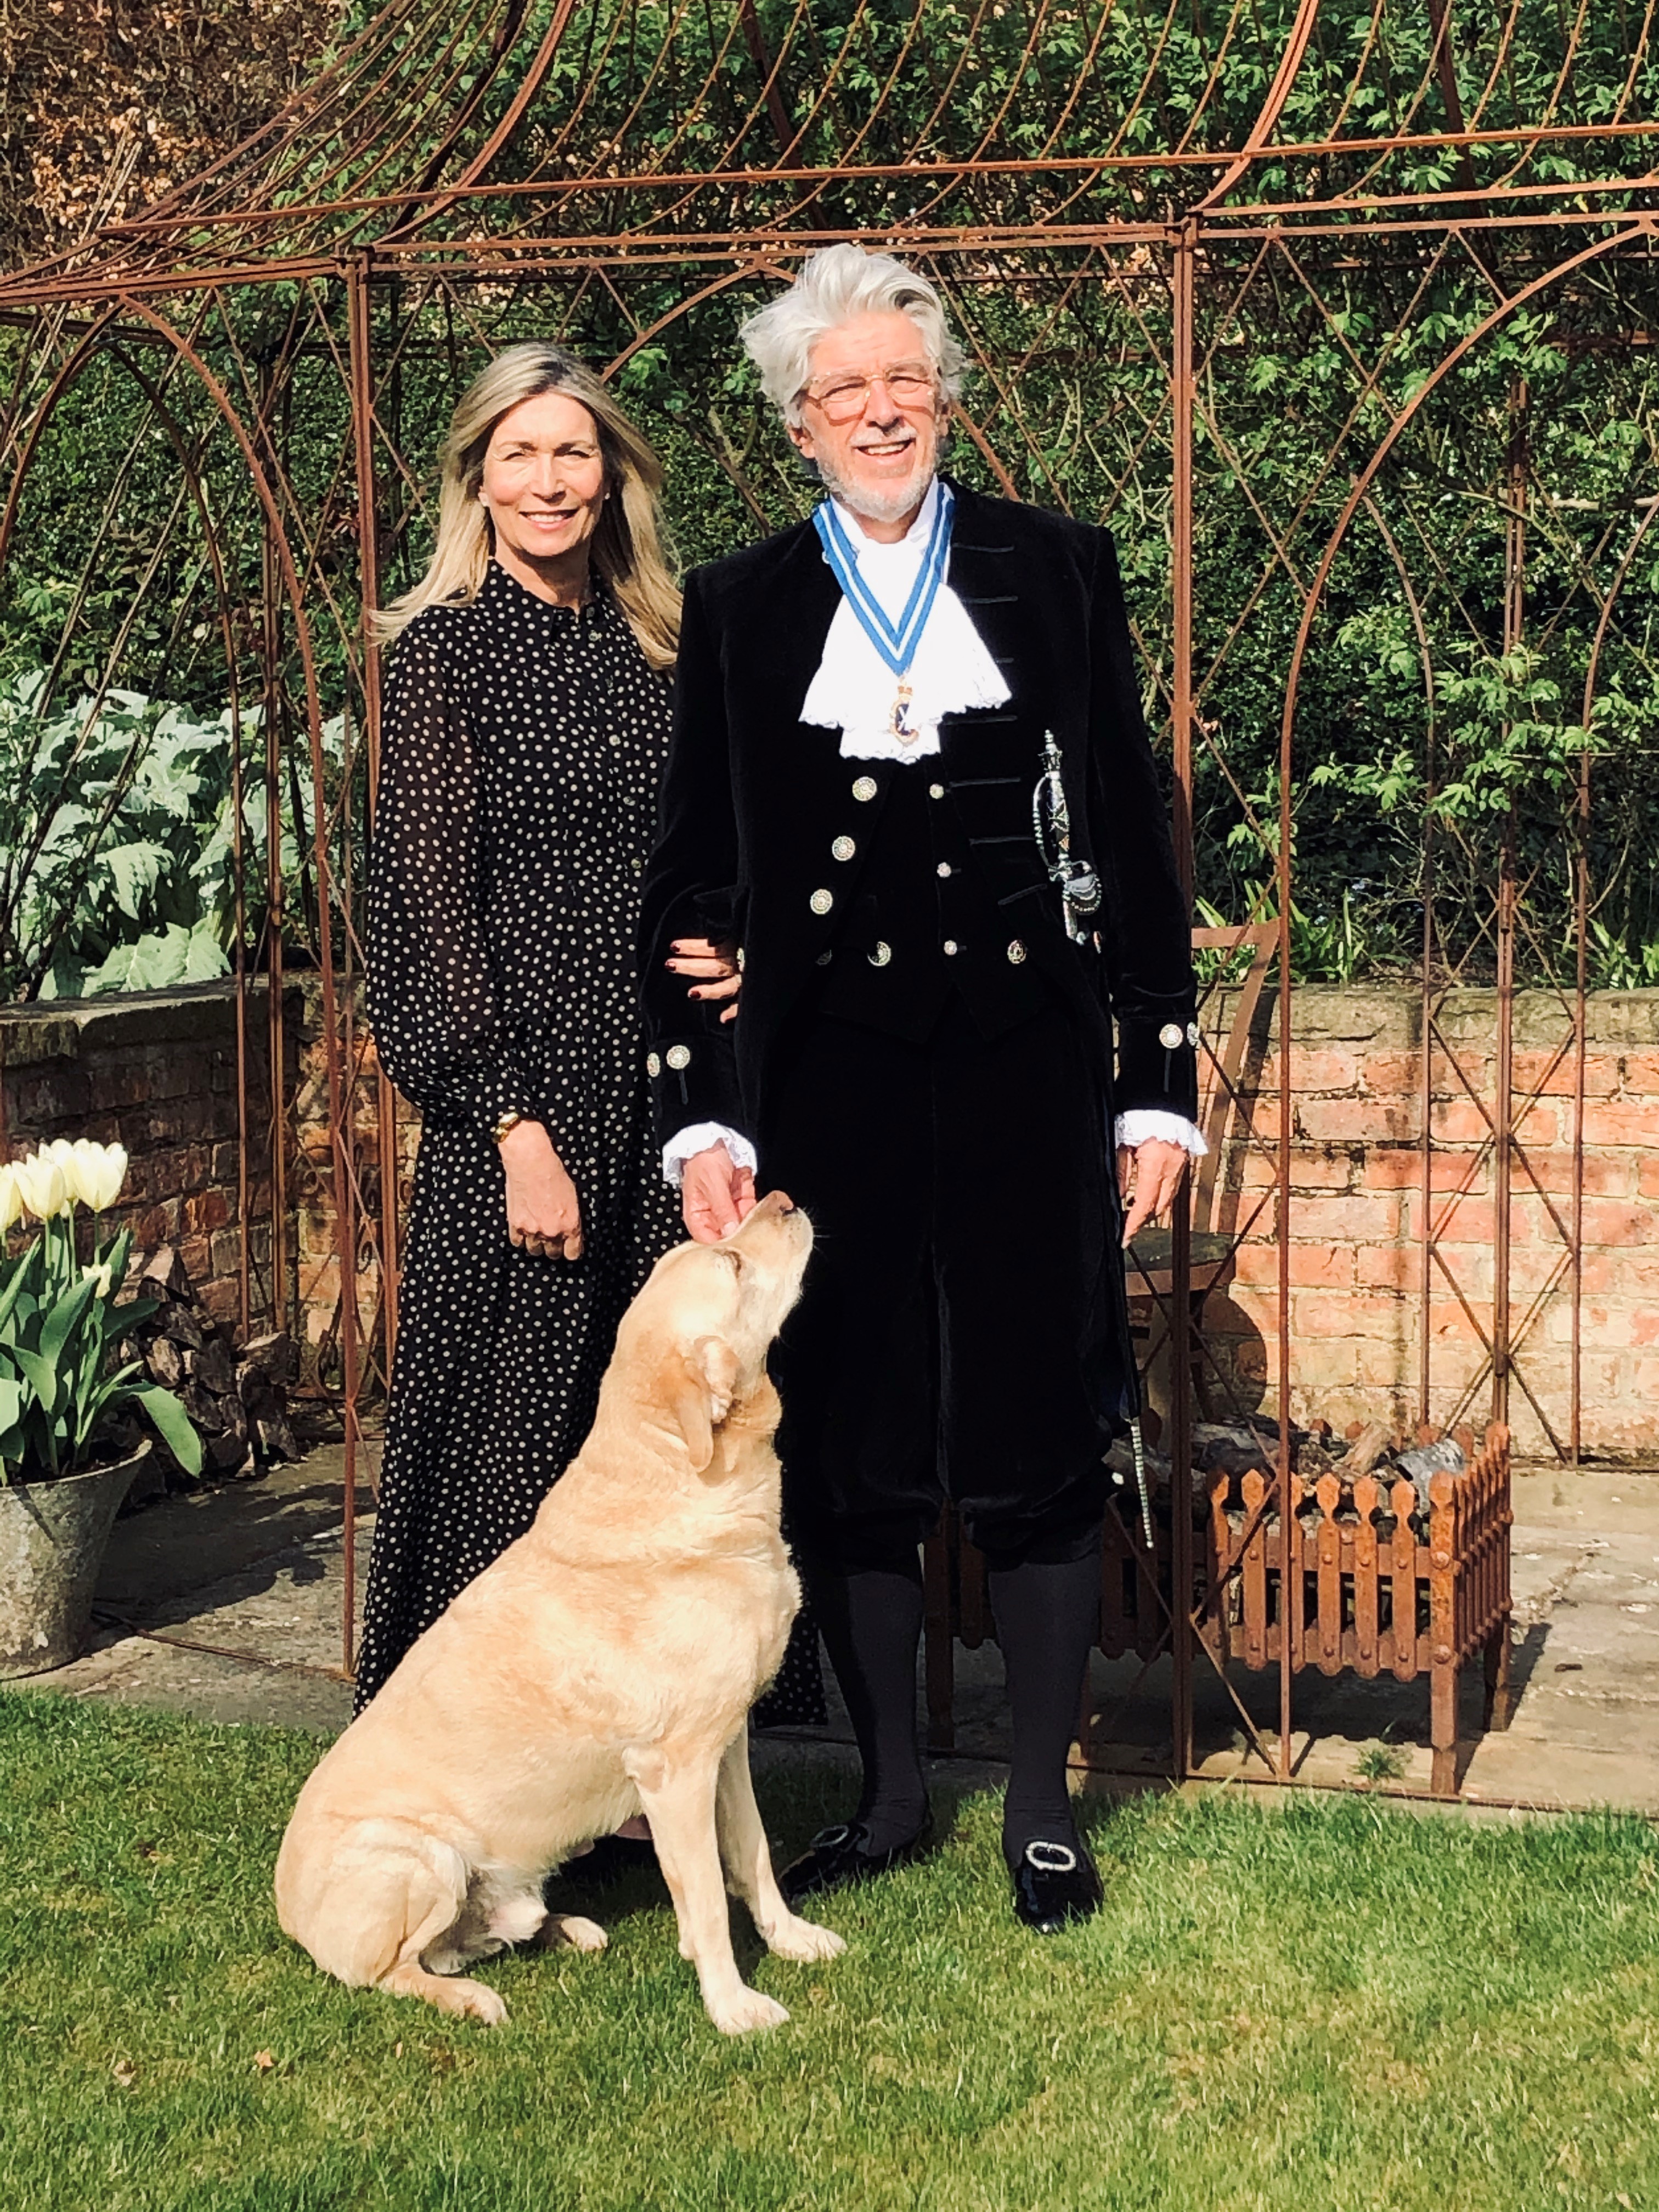 Nick Hopkinson is also the High Sheriff of Chester (Nick Hopkinson/University of Exeter/PA).